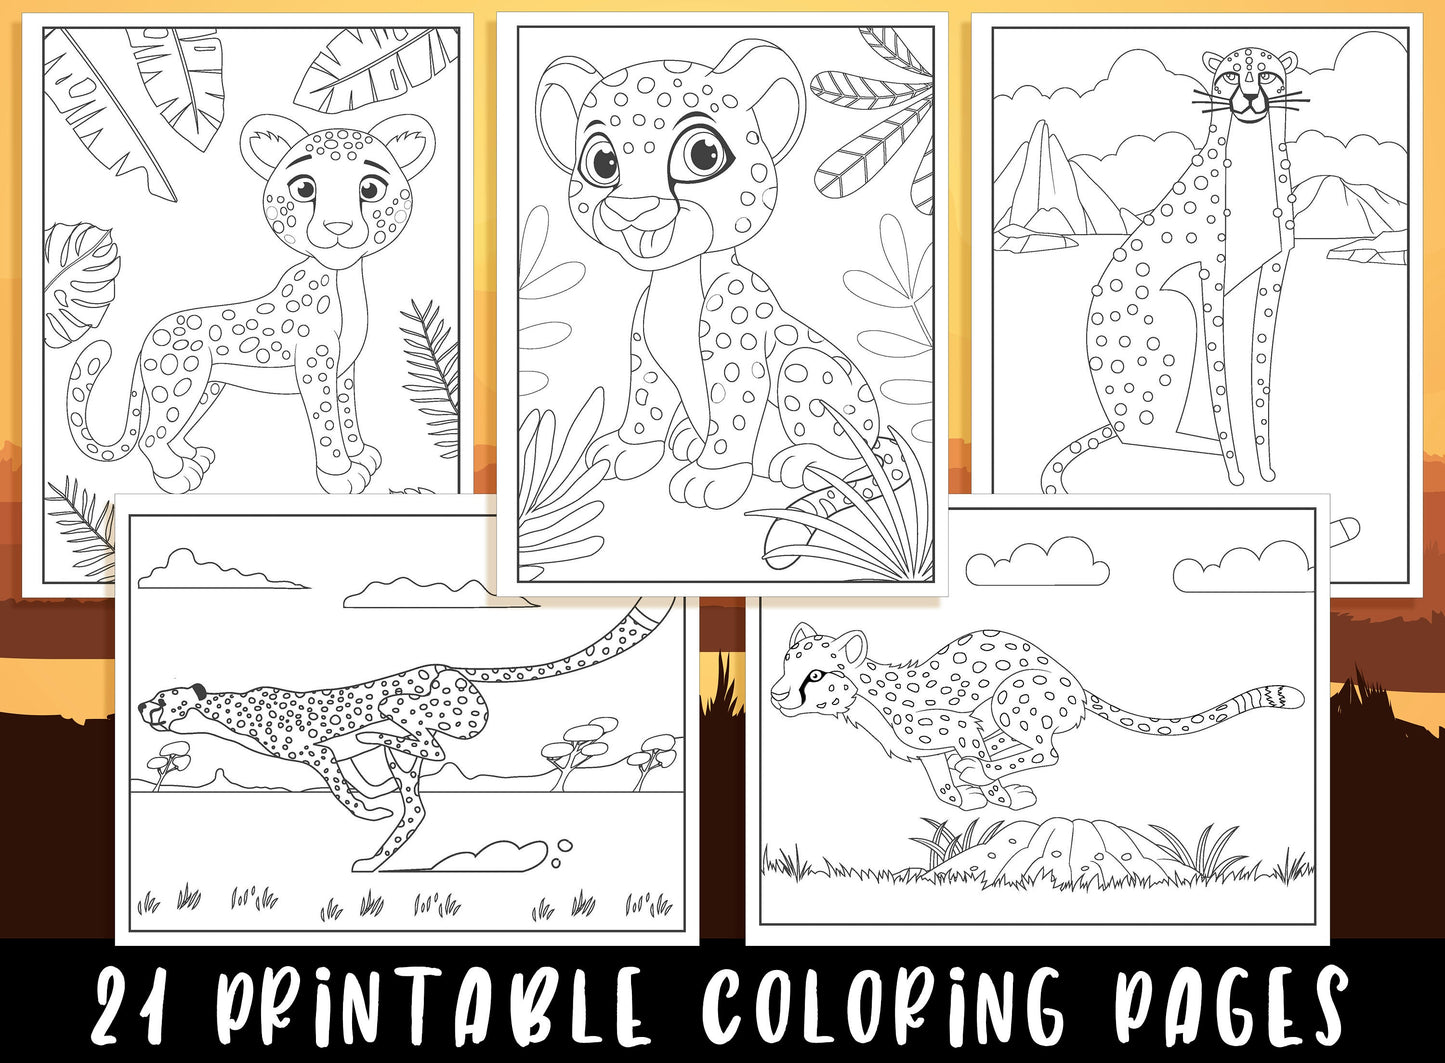 Cheetah Coloring Pages, 21 Printable Cheetah Coloring Pages for Kids, Boys, Girls, Teens, Cheetah Birthday Party Activity, Instant Download.